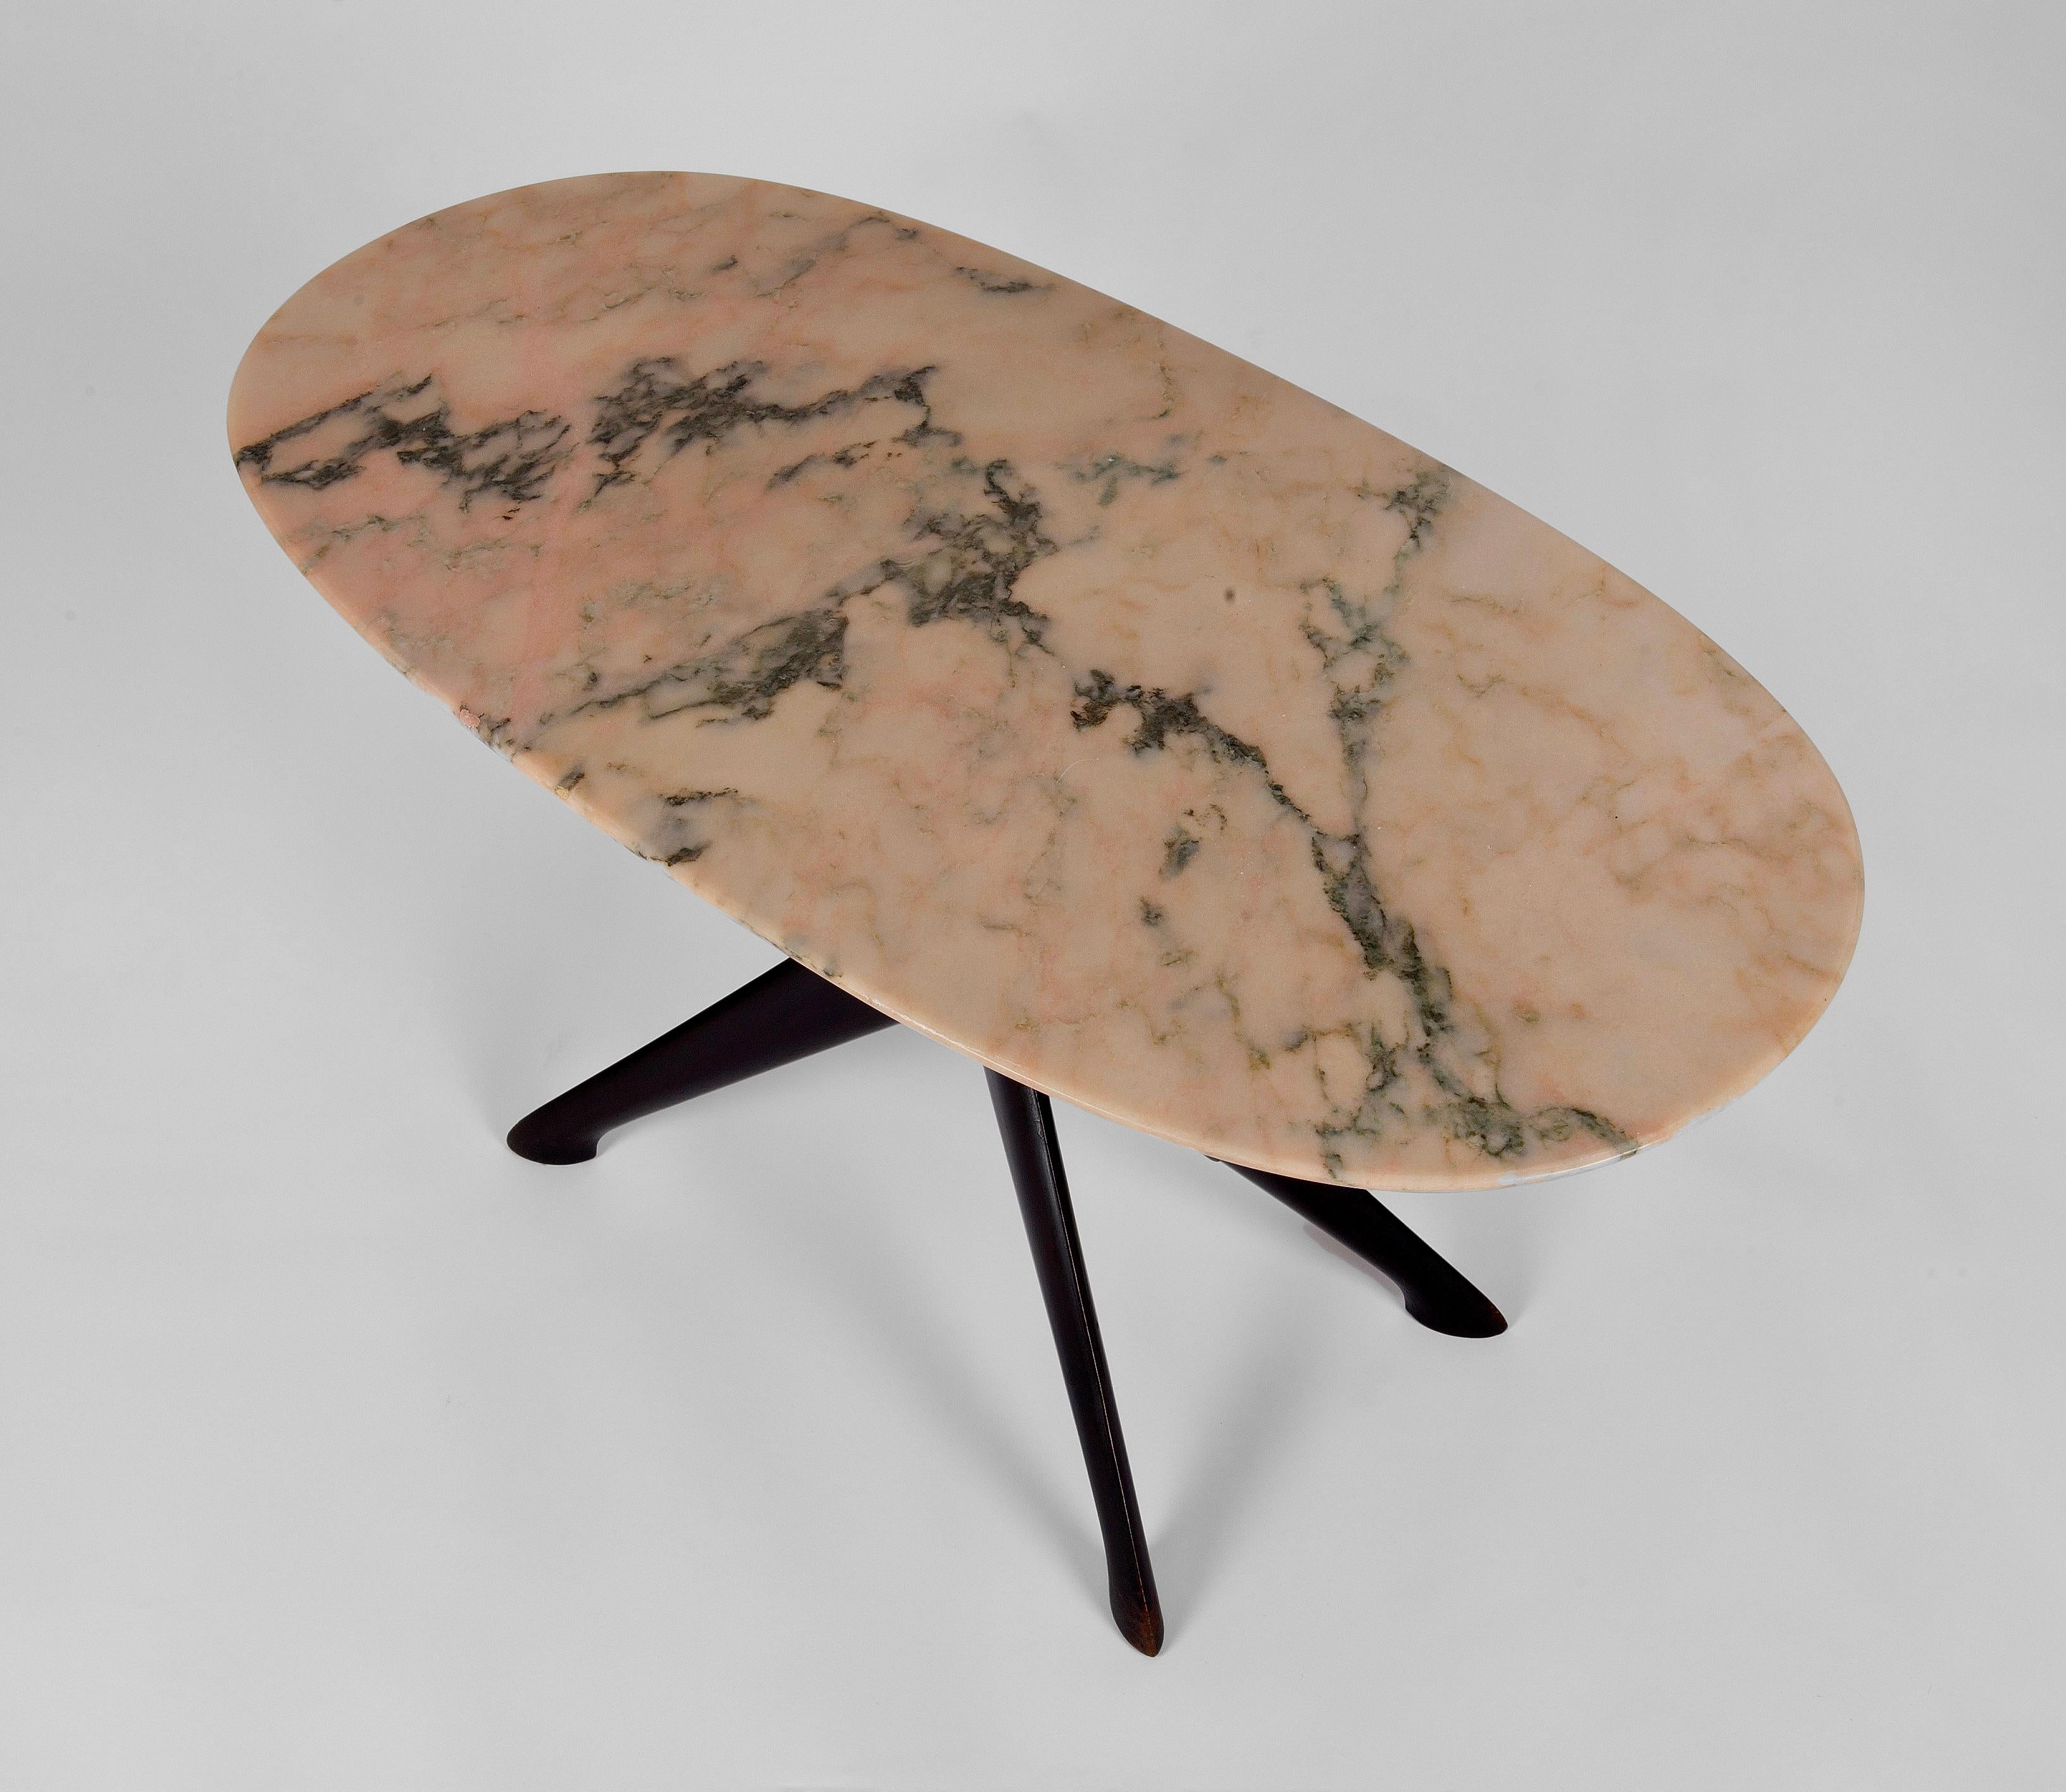 An Italian ebonised wooden coffee table from the celebrated architect and designer, Ico Parisi. This stunning example, with a pink and green oval marble table top, was produced for Parisi by the manufacturers Fratelli Rizzi who were based in